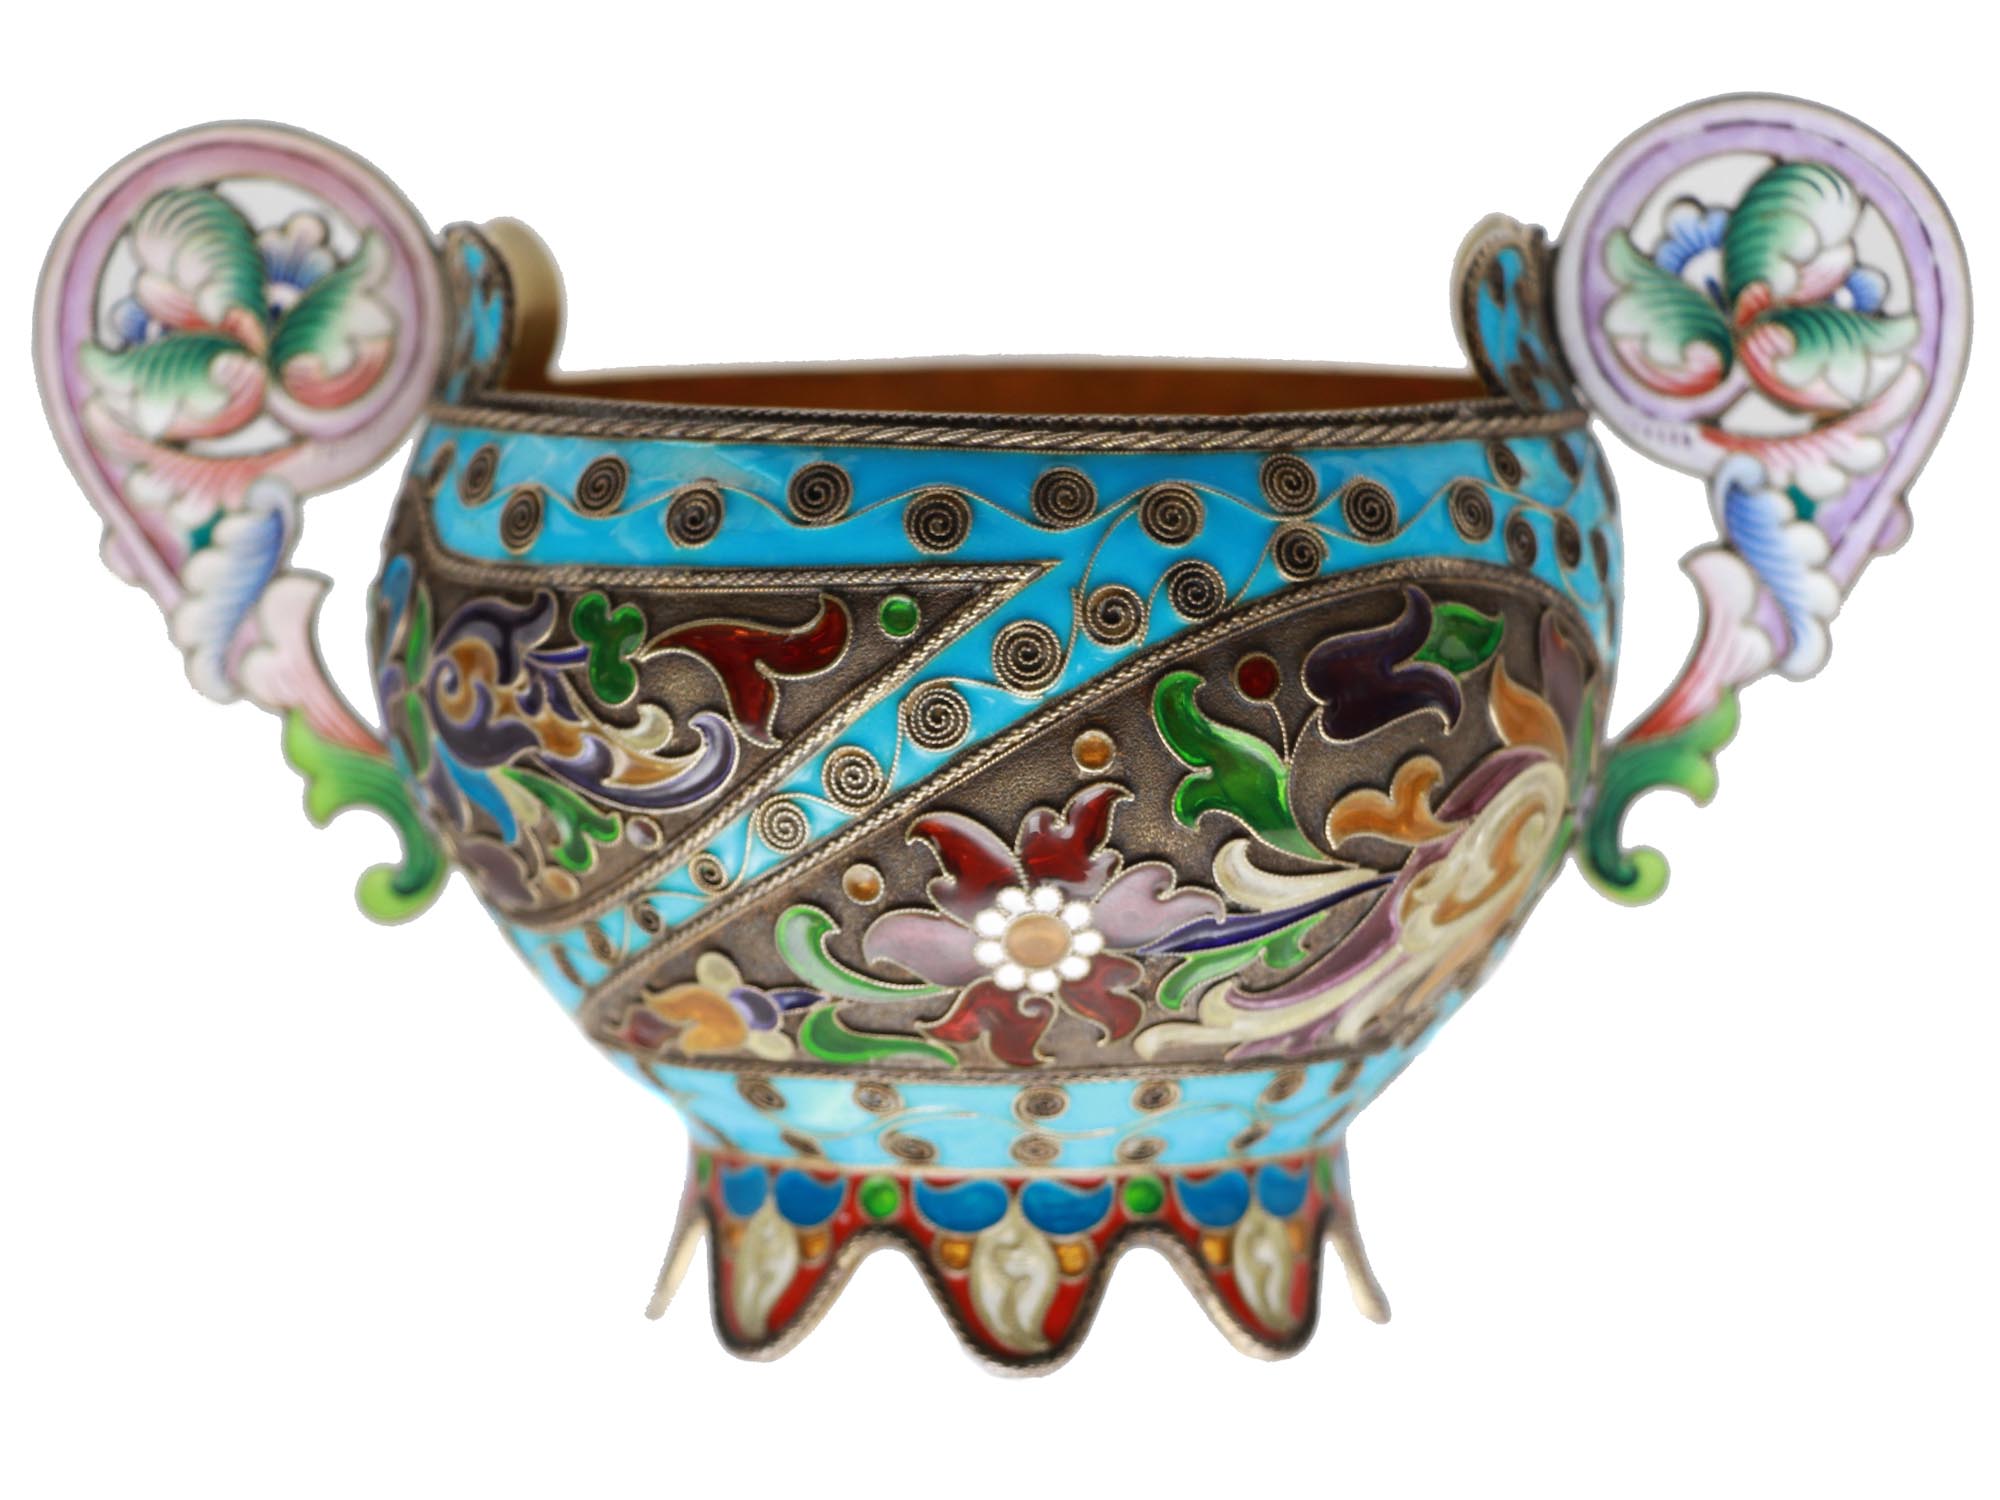 A RUSSIAN SILVER AND ENAMEL PLAQUE A JOUR BOWL PIC-2